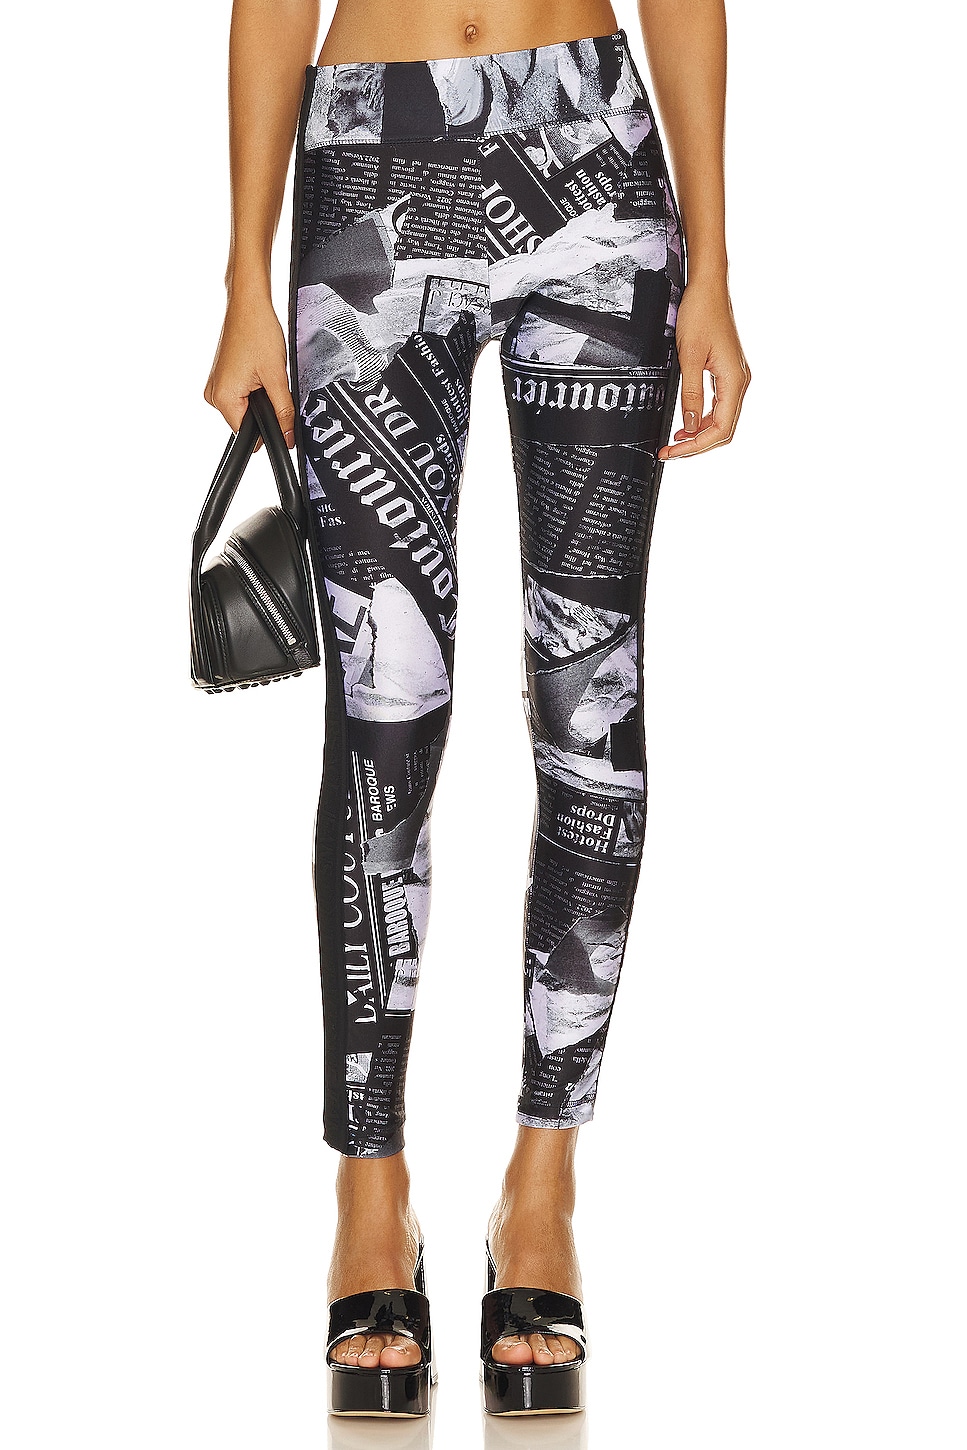 Black Printed Leggings by Versace Jeans Couture on Sale